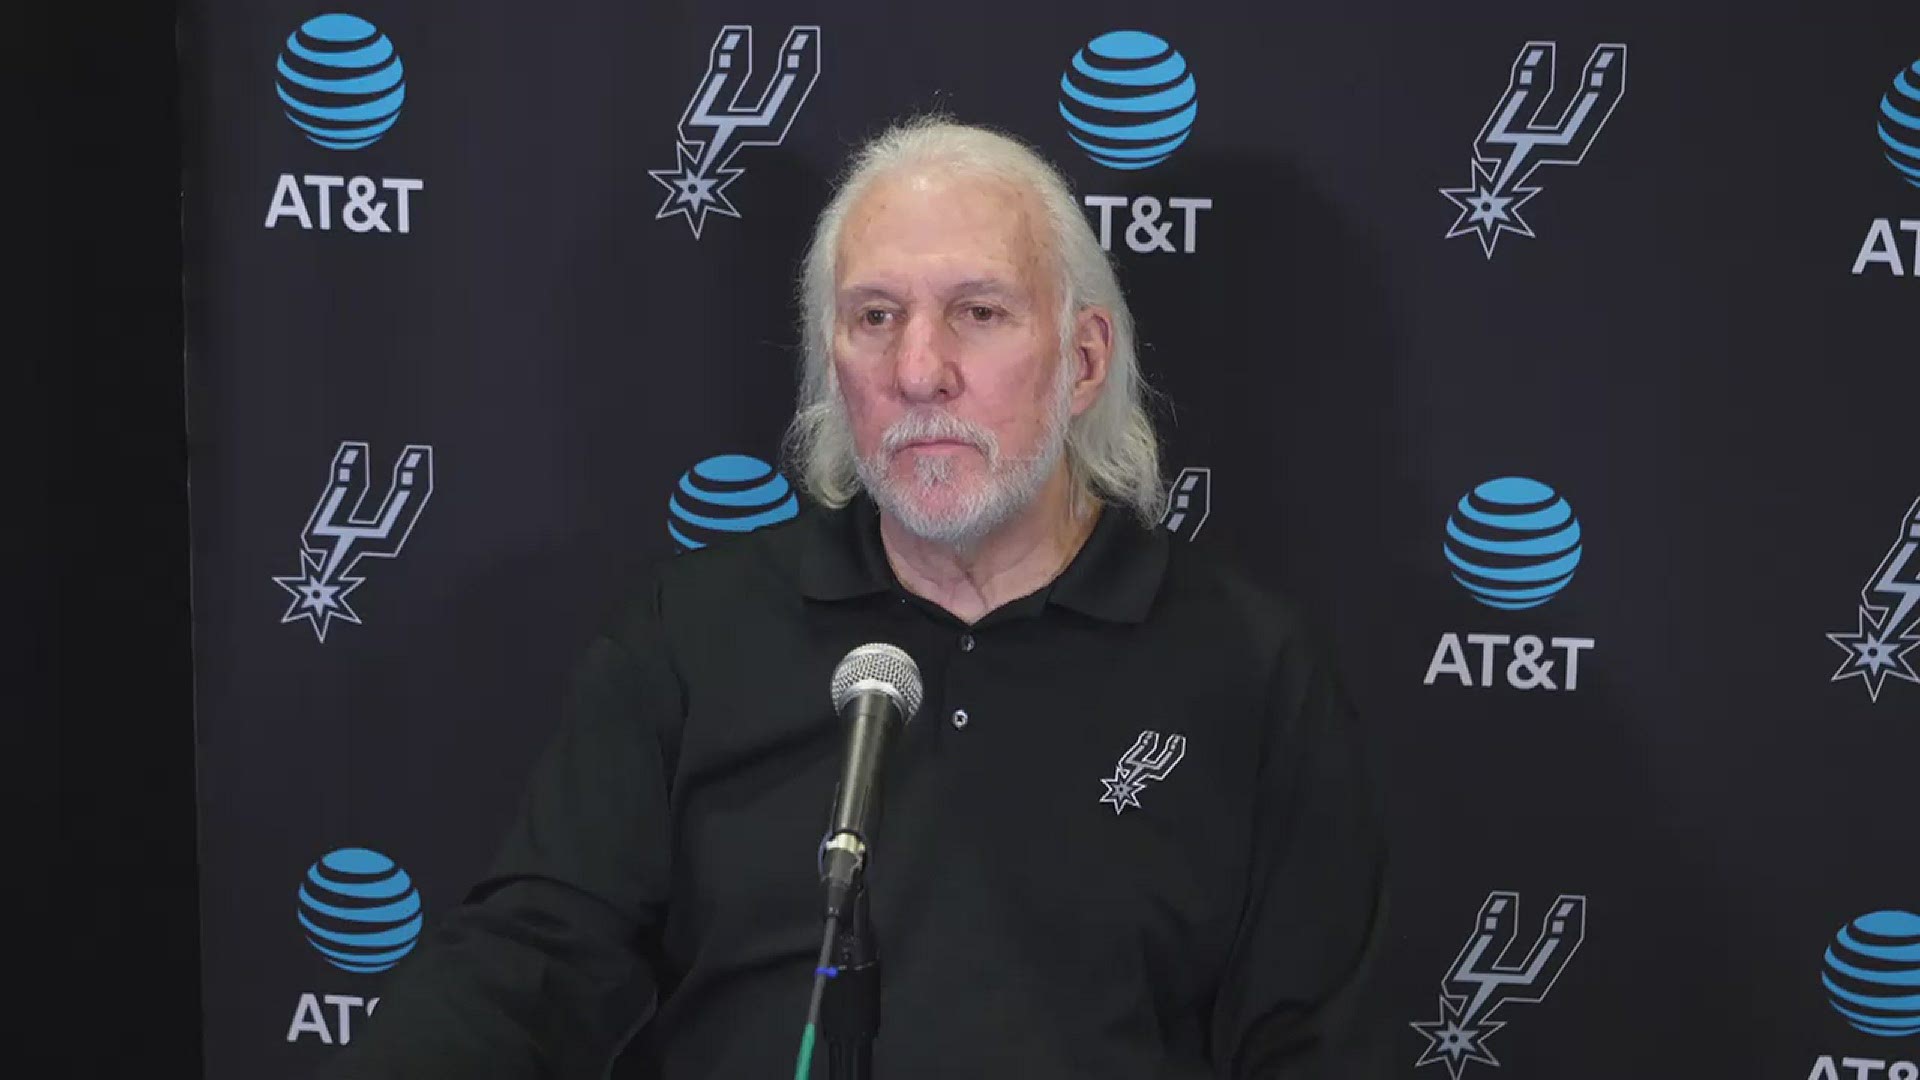 Popovich said DeRozan has bought in to ball movement, Johnson is learning the game well, and Morant is a heck of a player who is growing more confident.